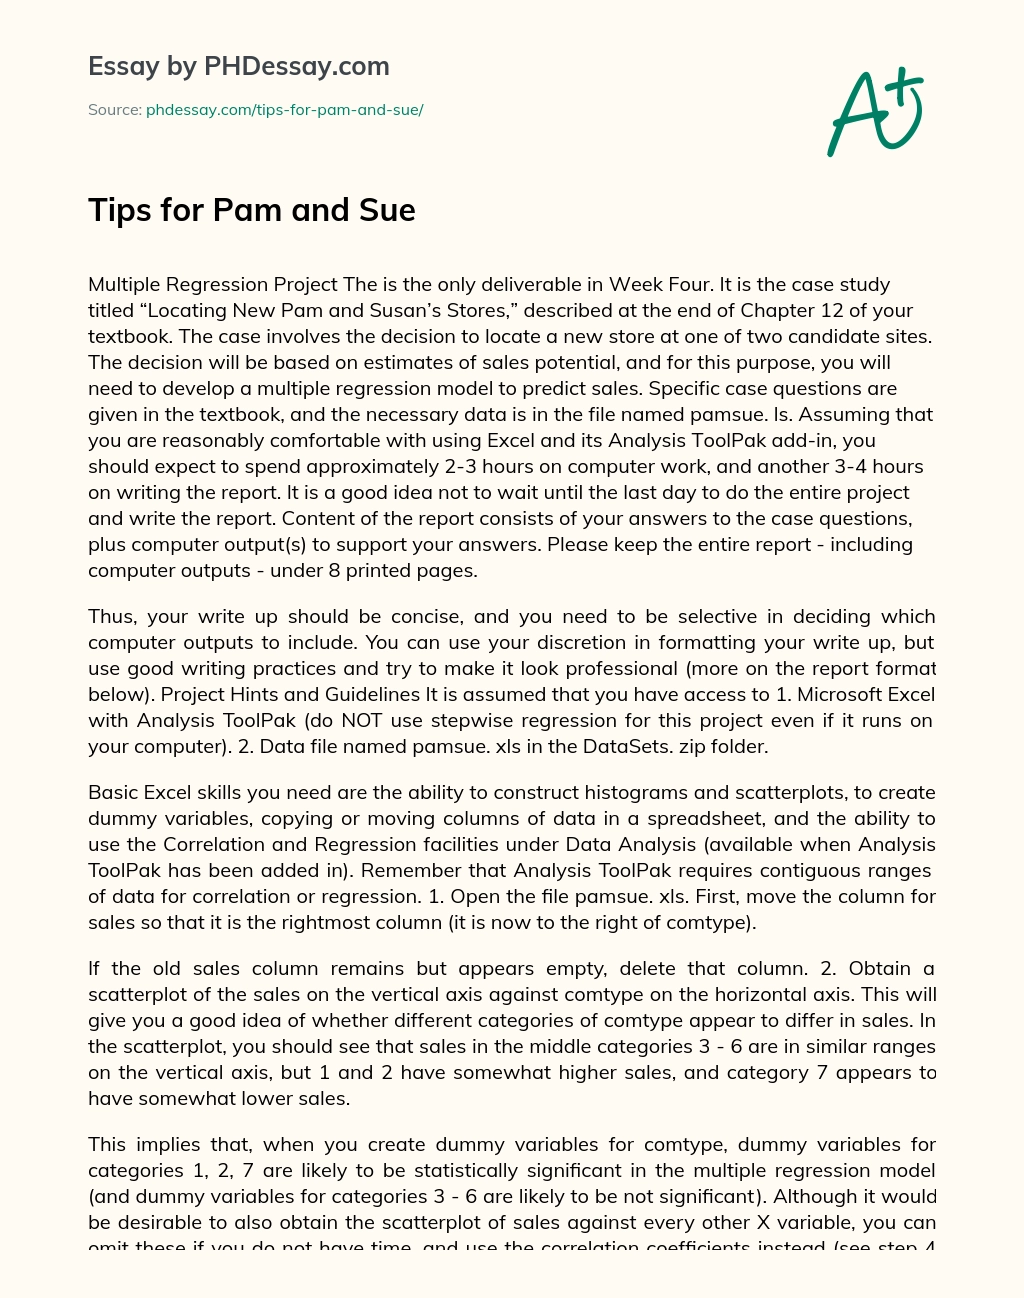 Tips for Pam and Sue essay